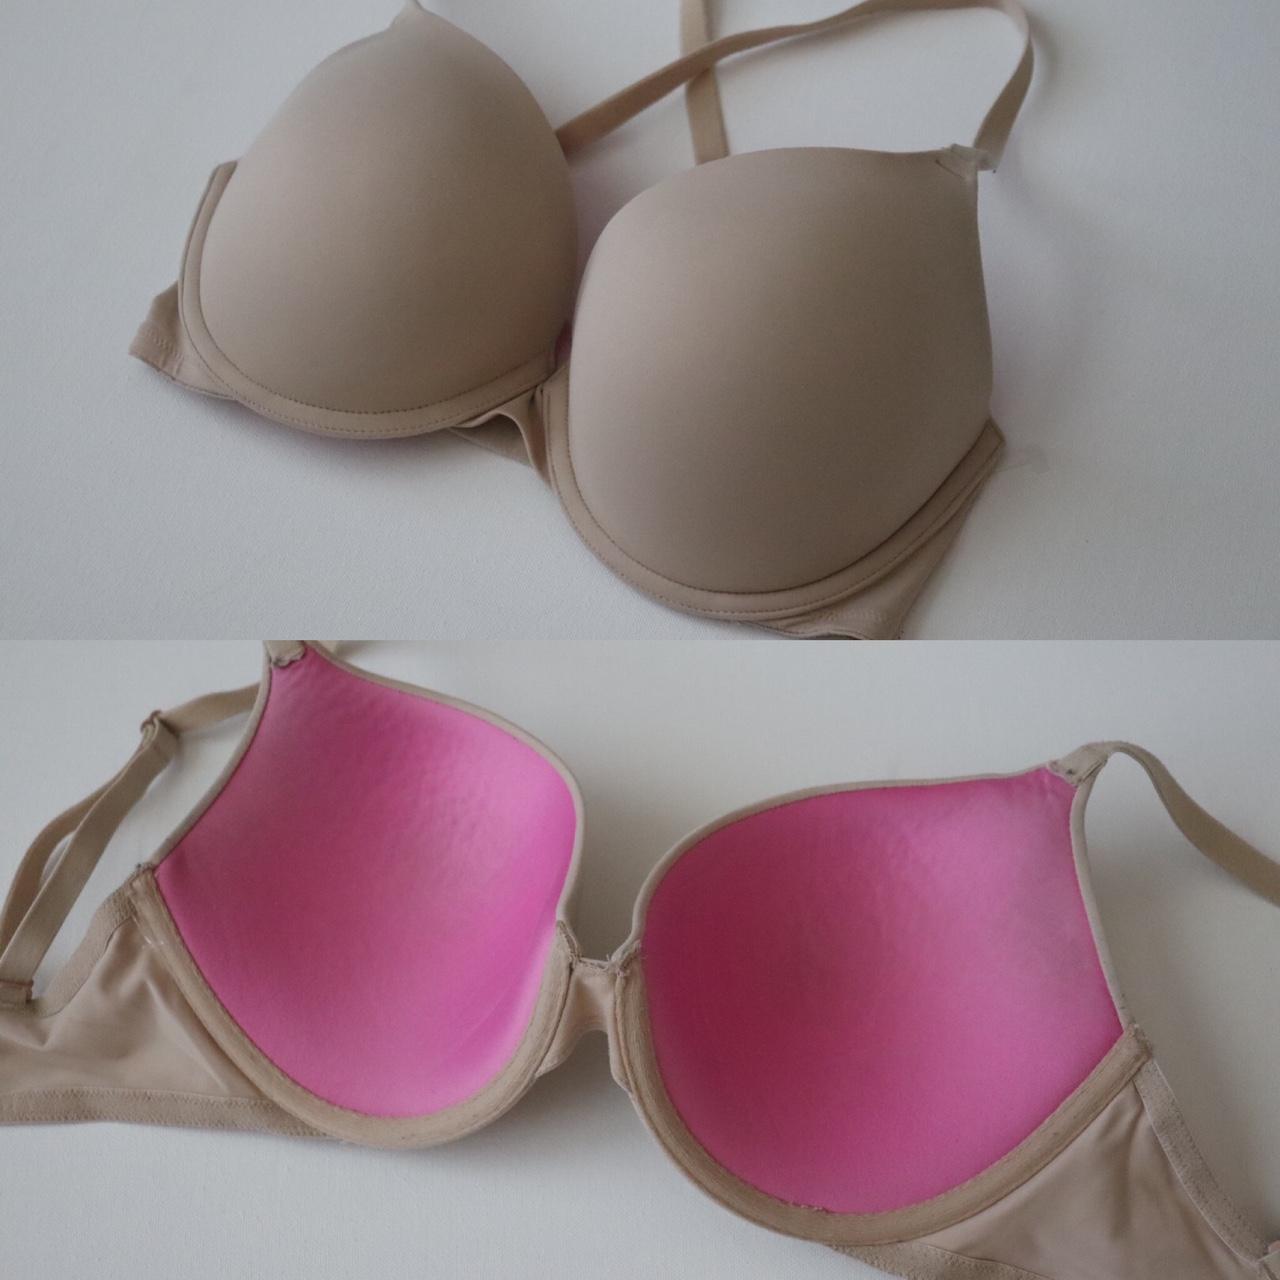 Nude VS bra sz 32DD ❤️ gently used with normal minor